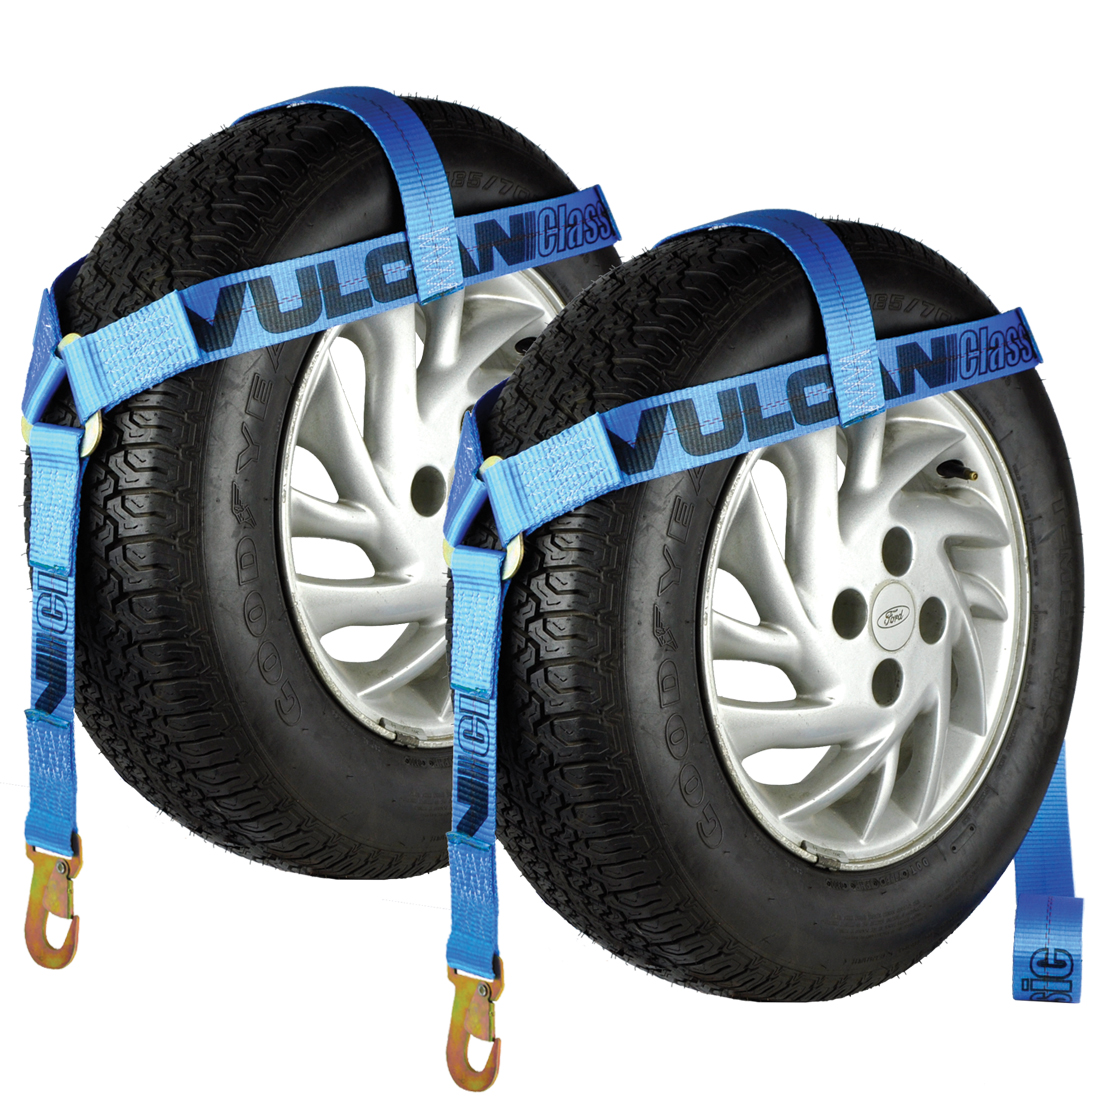 SWL 3300 lbs VULCAN Blue 84 Twisted Snap Hook Wheel Dolly Tire Harness